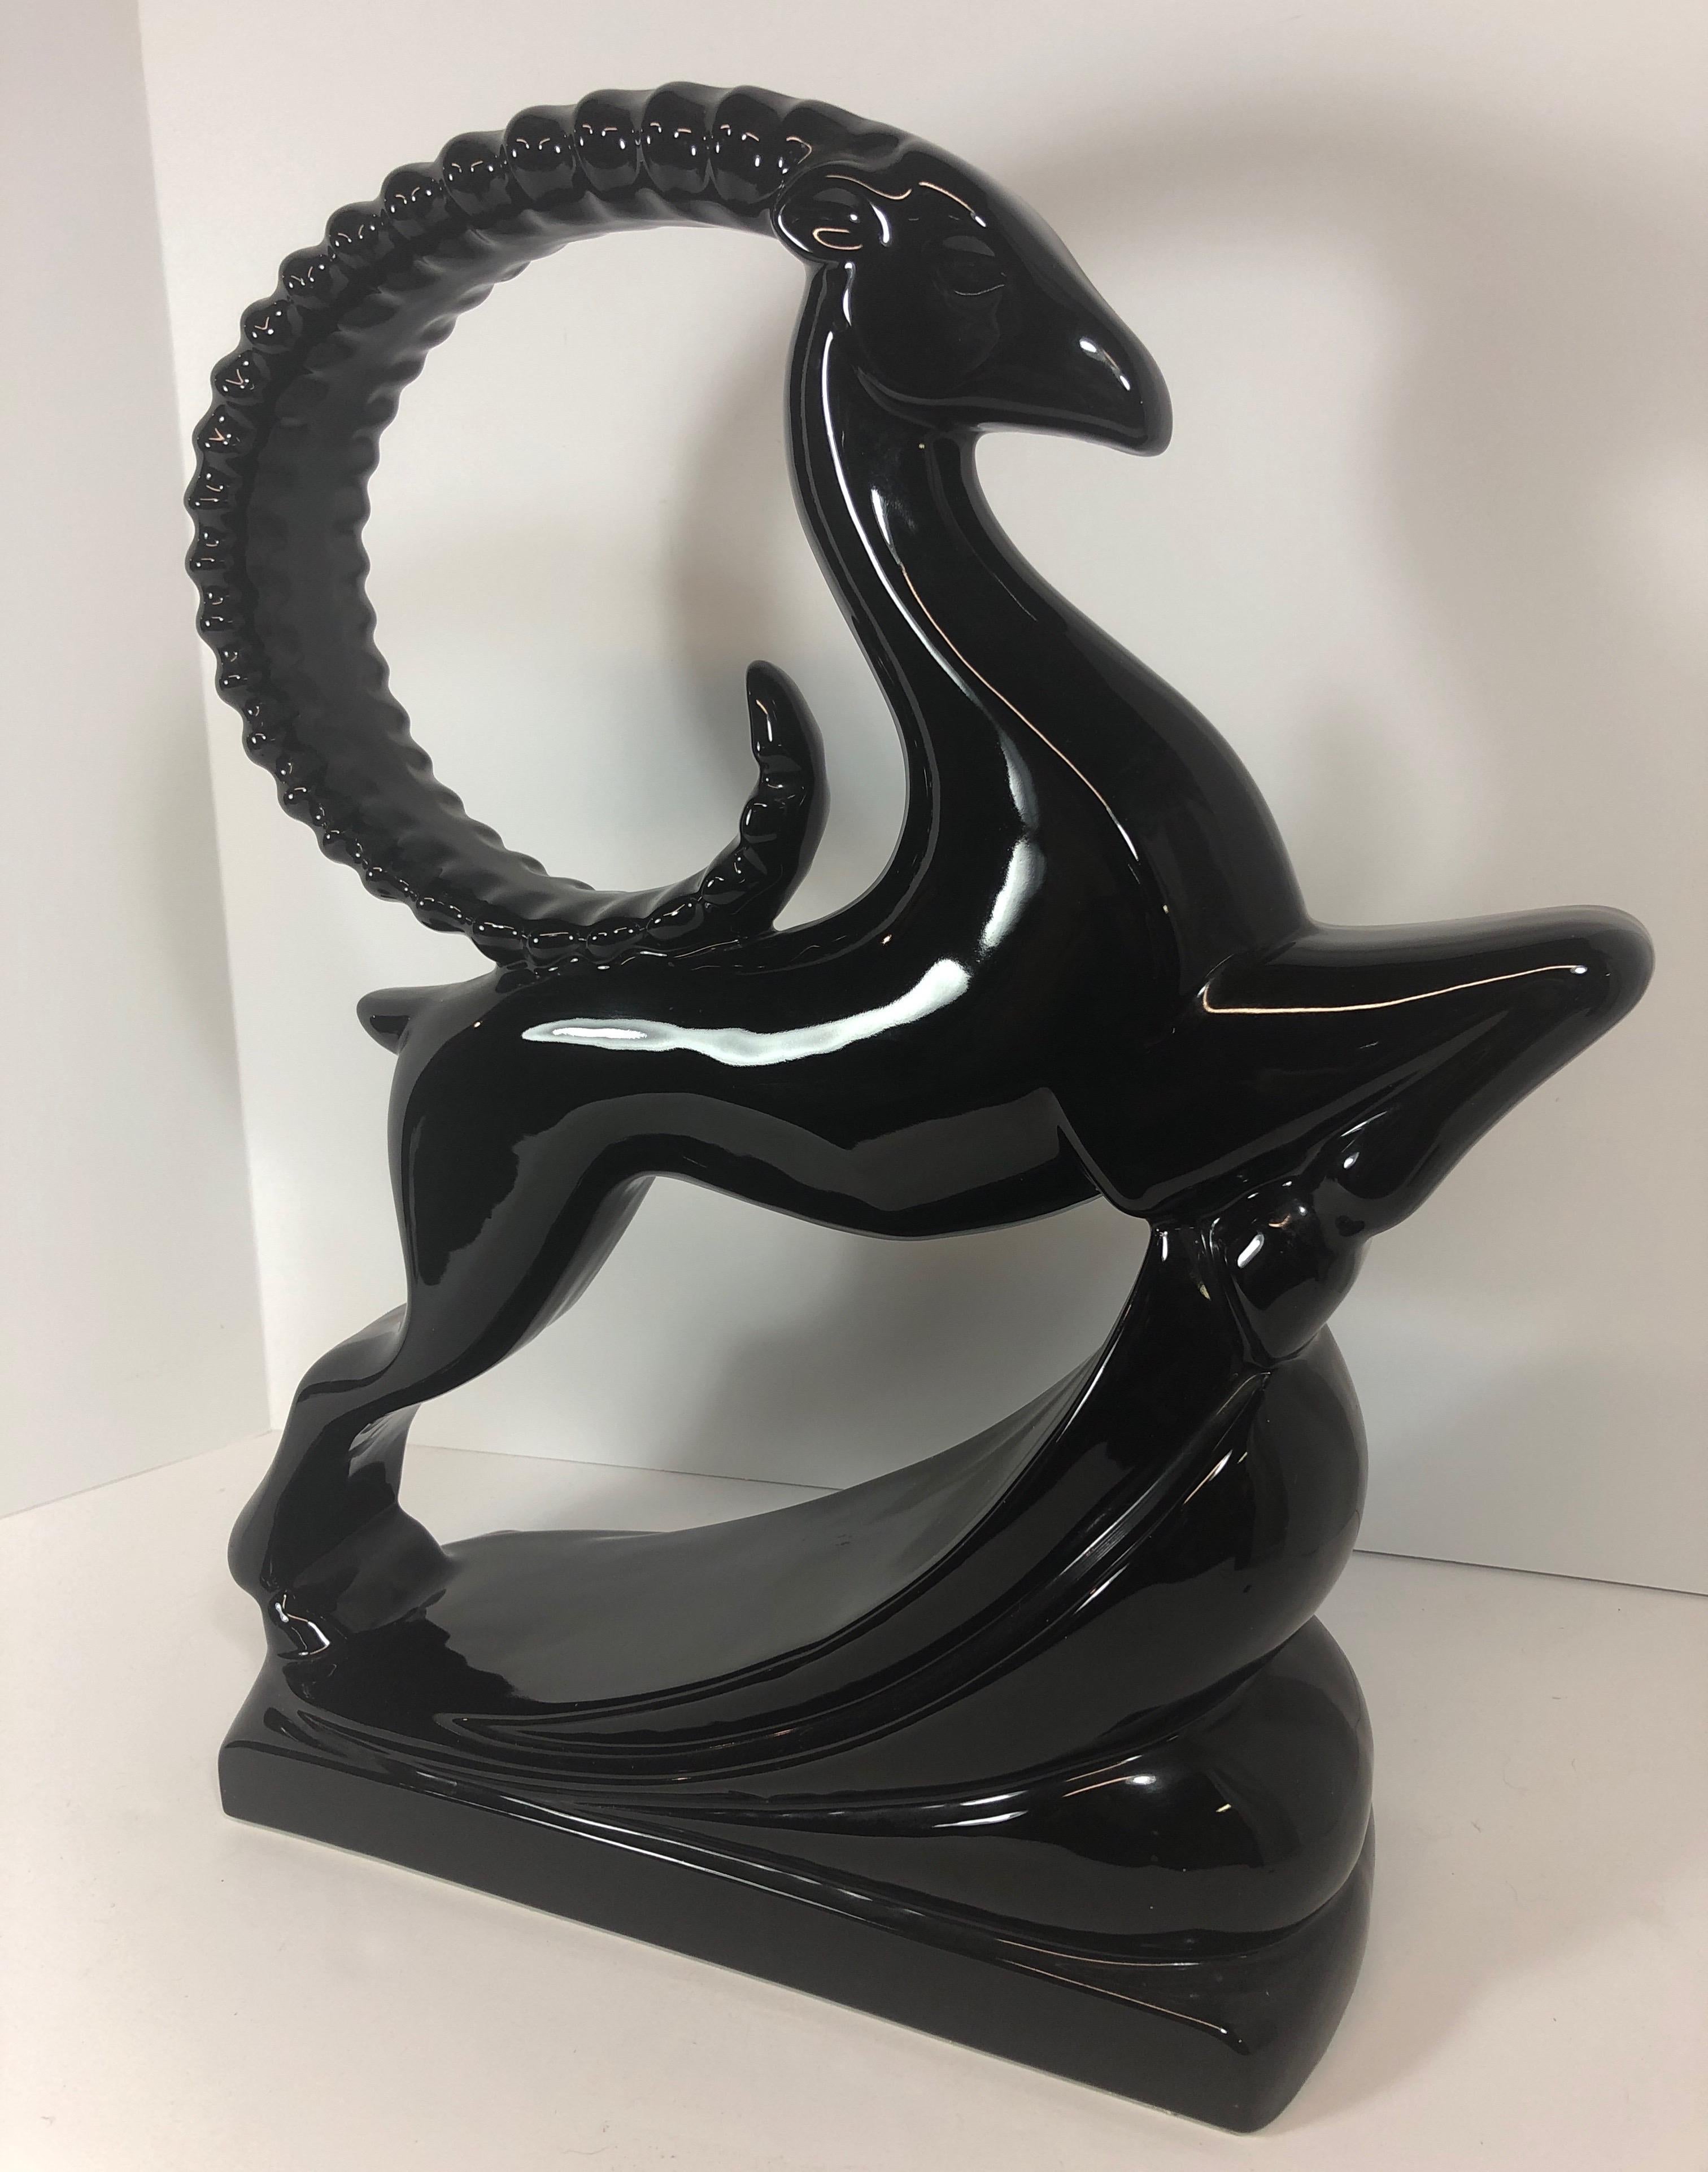 A vintage Art Deco sculpture of an elegant black gazelle in mid-leap, produced by Royal Haeger, circa 1940s-1950s, in glazed ceramic. Markings include original label [Haeger/American Made], on the underside base of the sculpture. Very good vintage